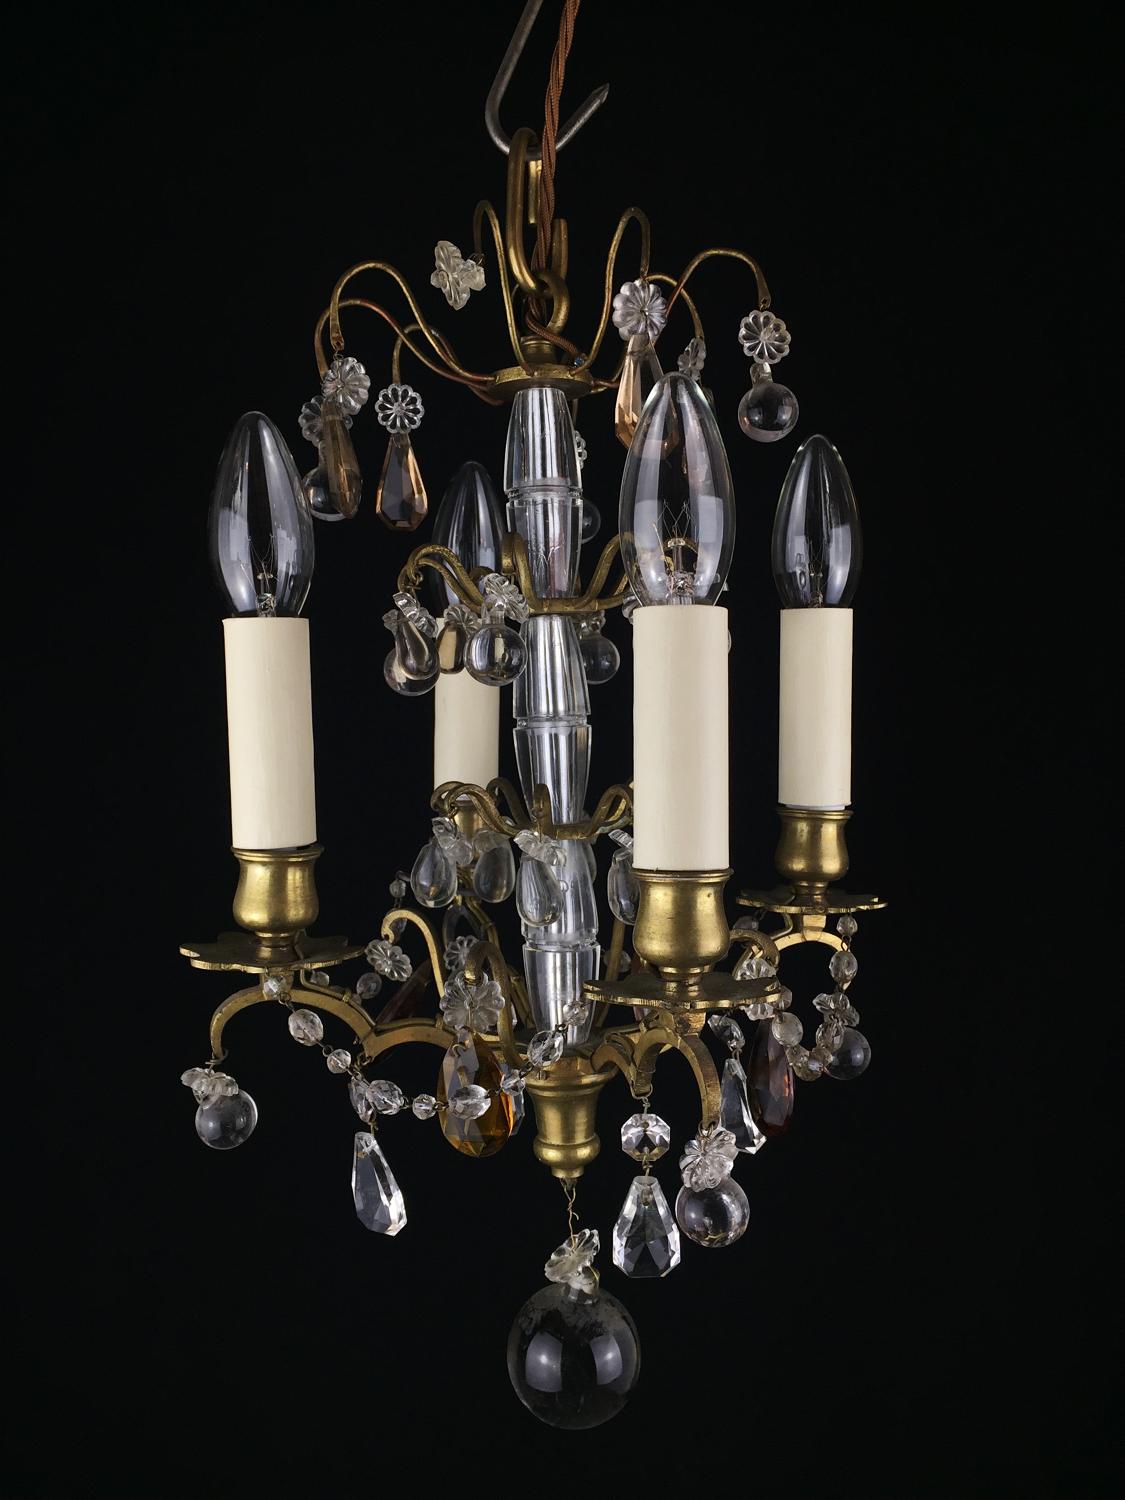 A small four light chandelier